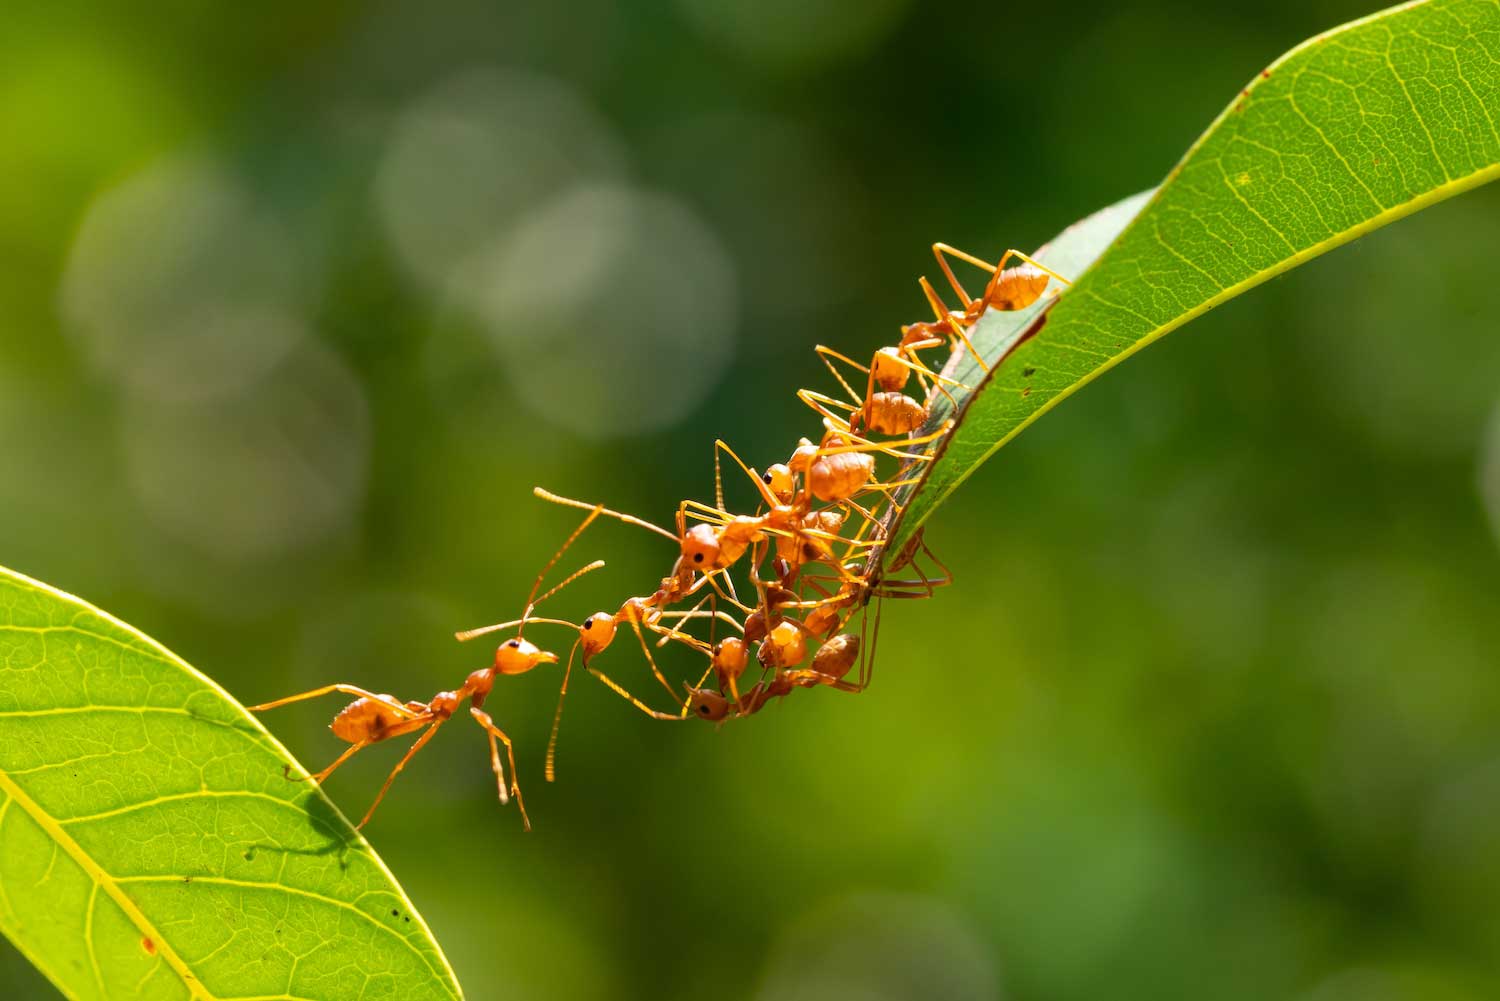 A group of ants forming a bridge to move from one leaf to another.